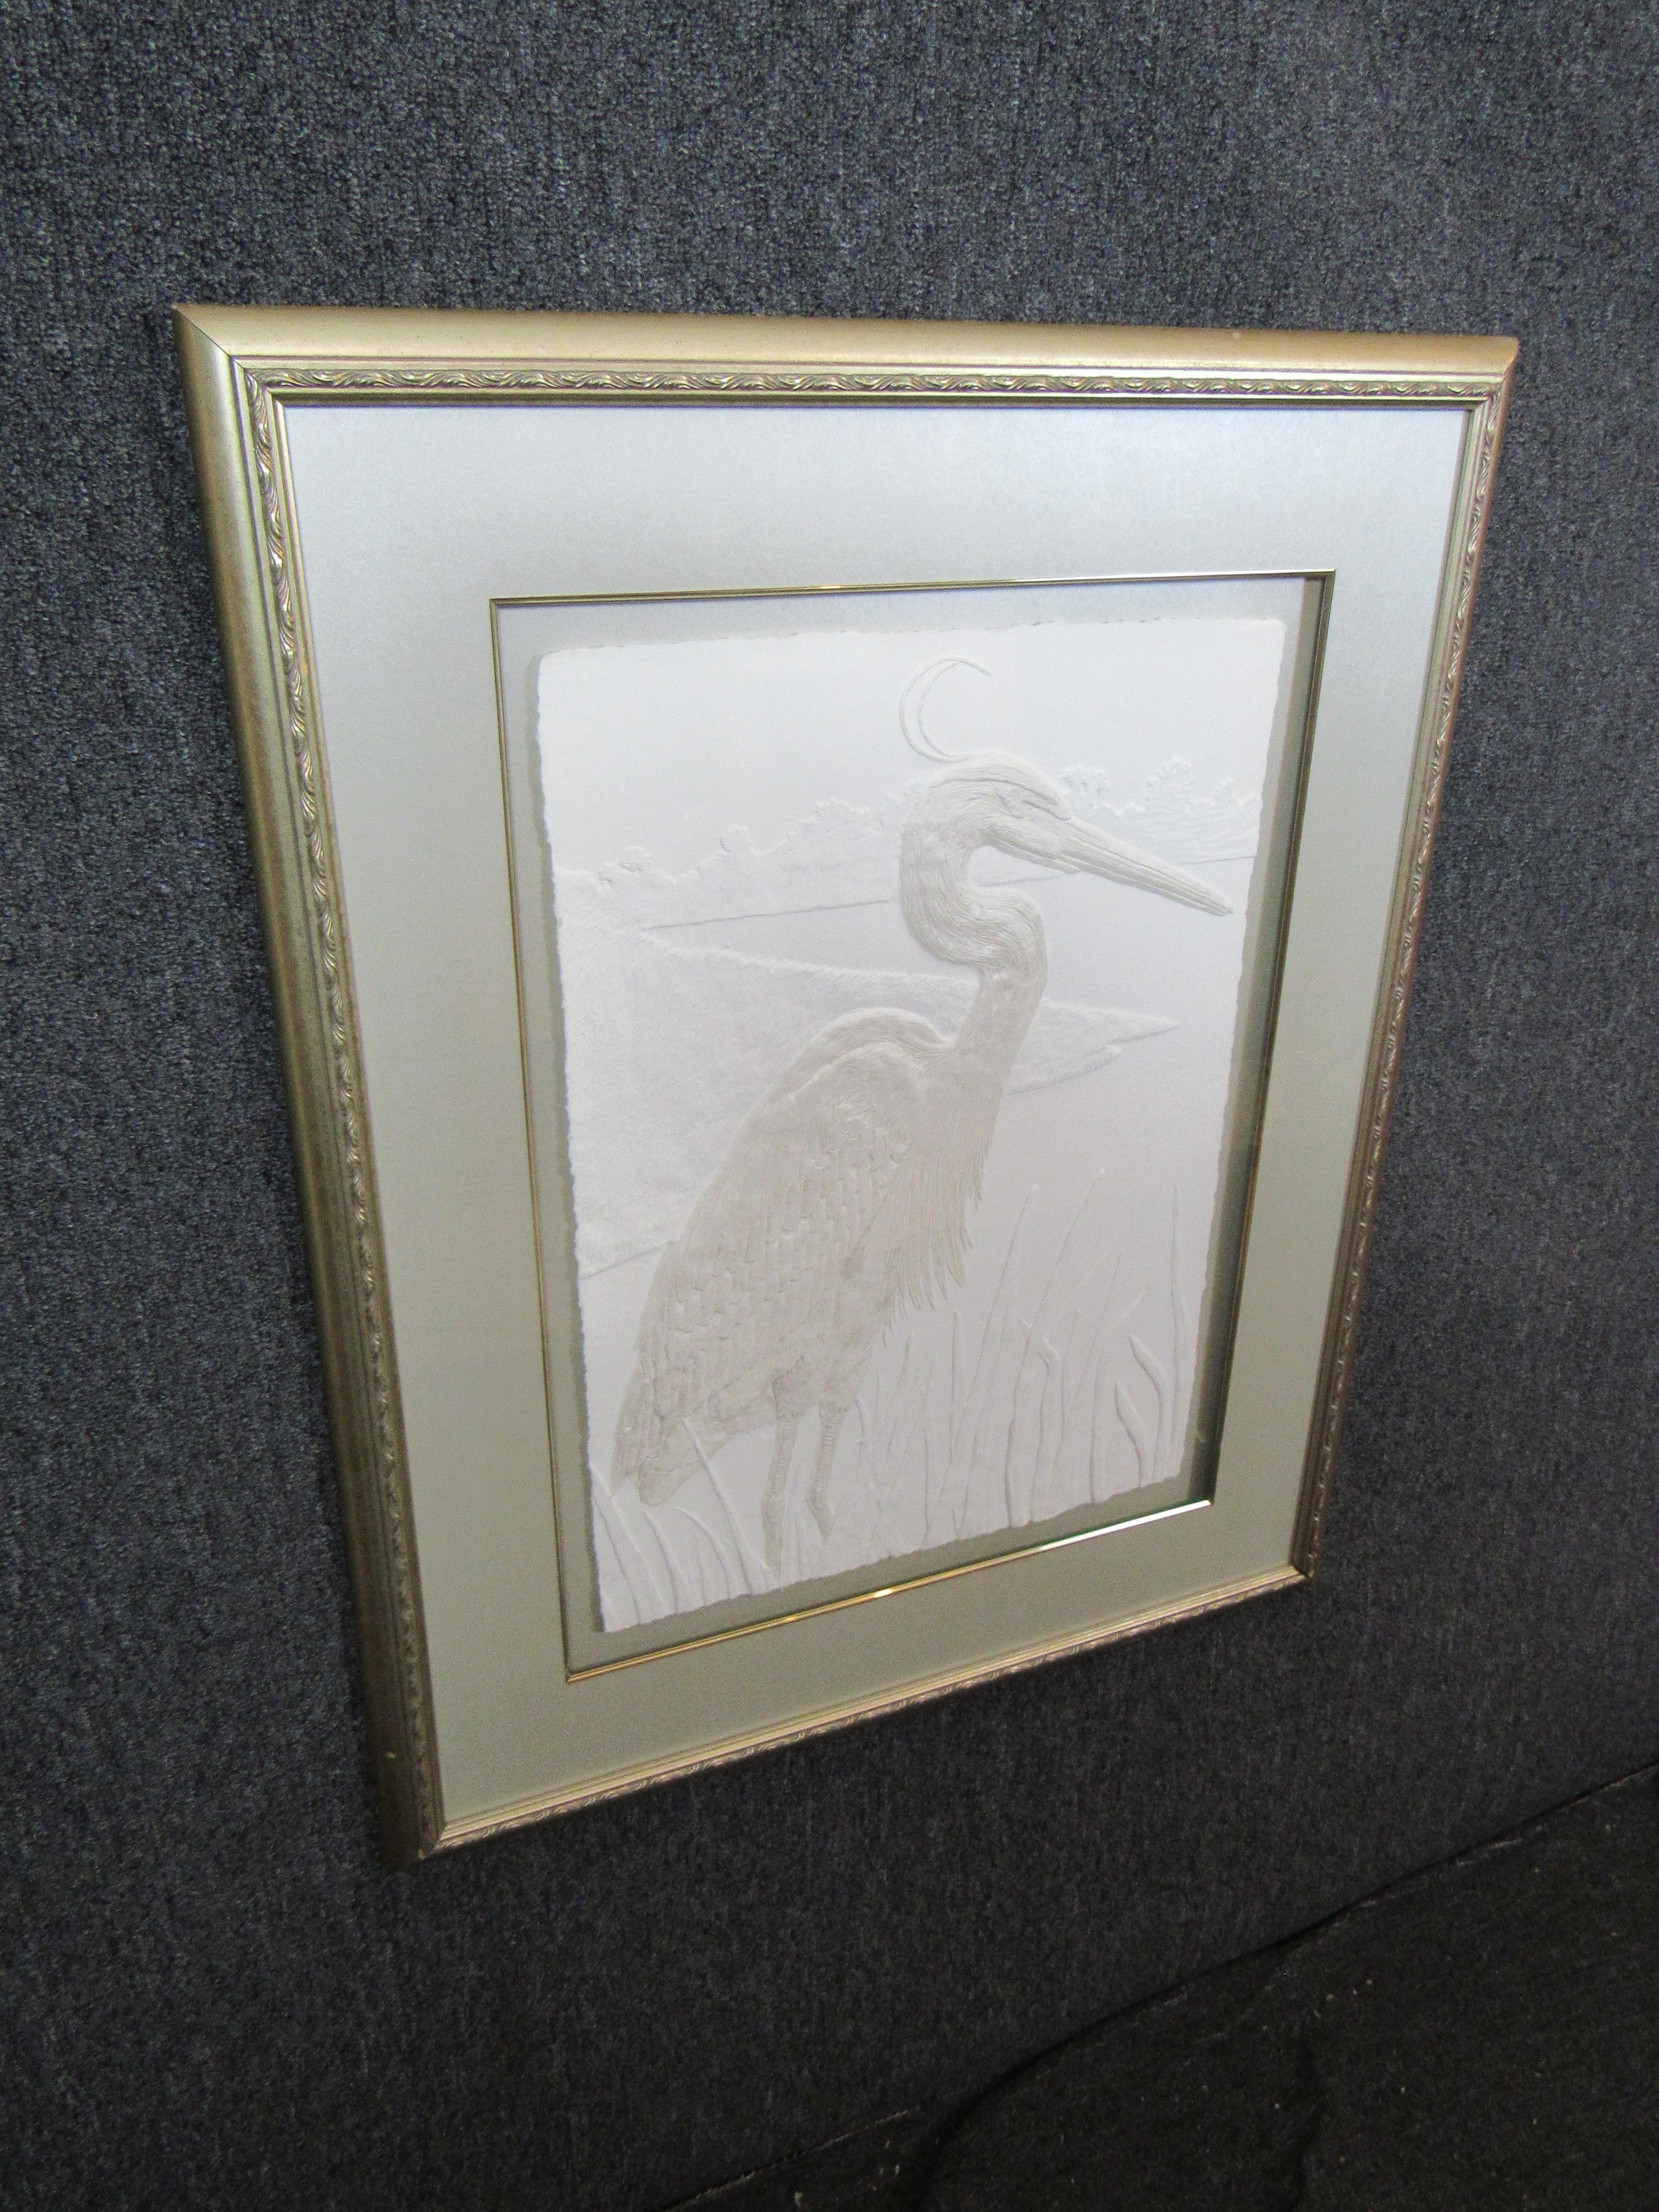 Turn any wall into an art gallery with this stunning embossed paper crane, set in a beautiful champagne gold frame. The artist's painstaking attention to detail gives the paper the appearance of embroidered silk. Provenance could be traced with more